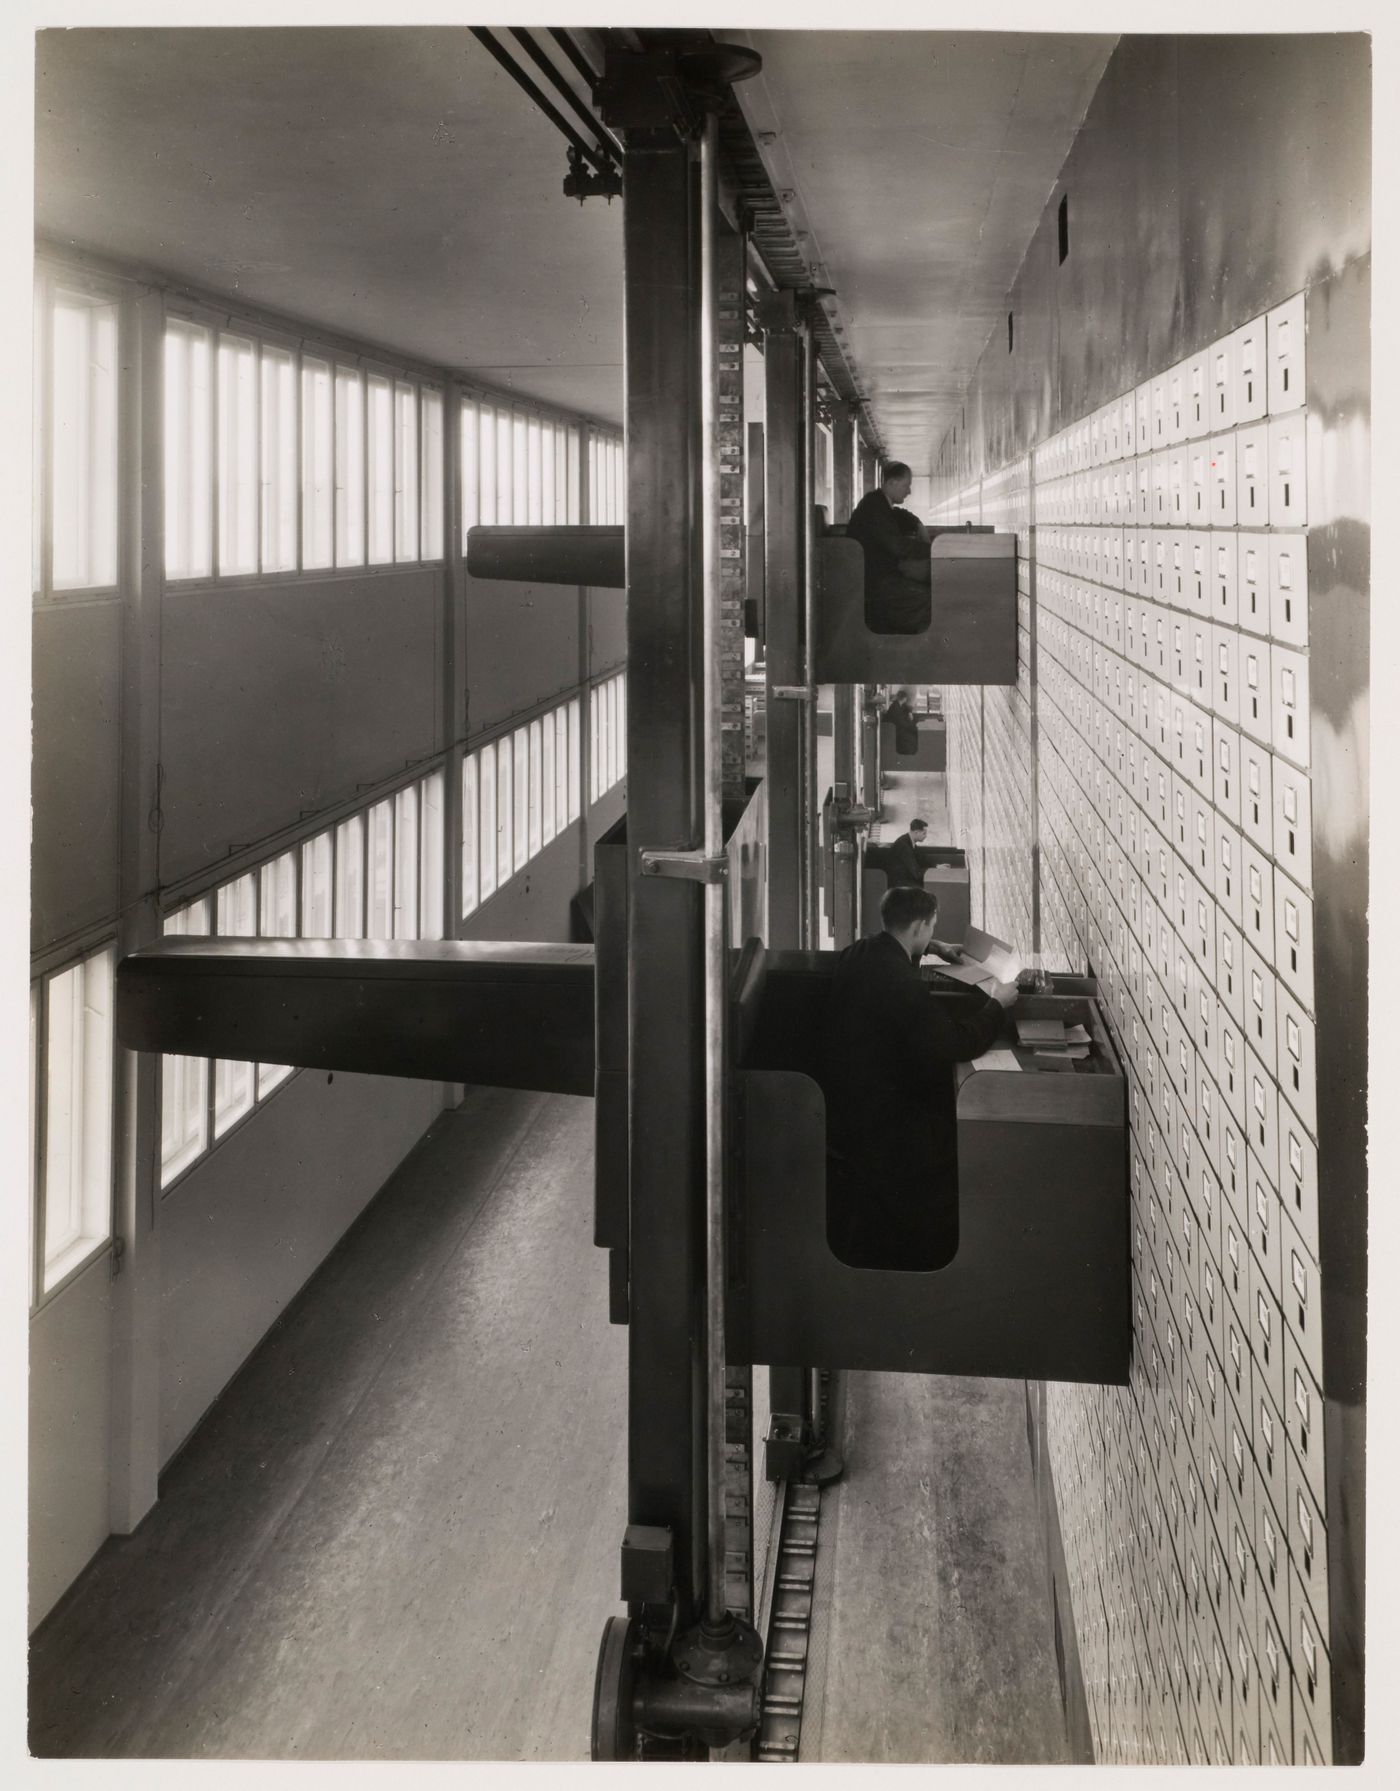 Interior view of the Central Social Insurance Institution showing men working in mobile work stations used to access the card catalog drawers, Prague, Czechoslovakia (now Czech Republic)